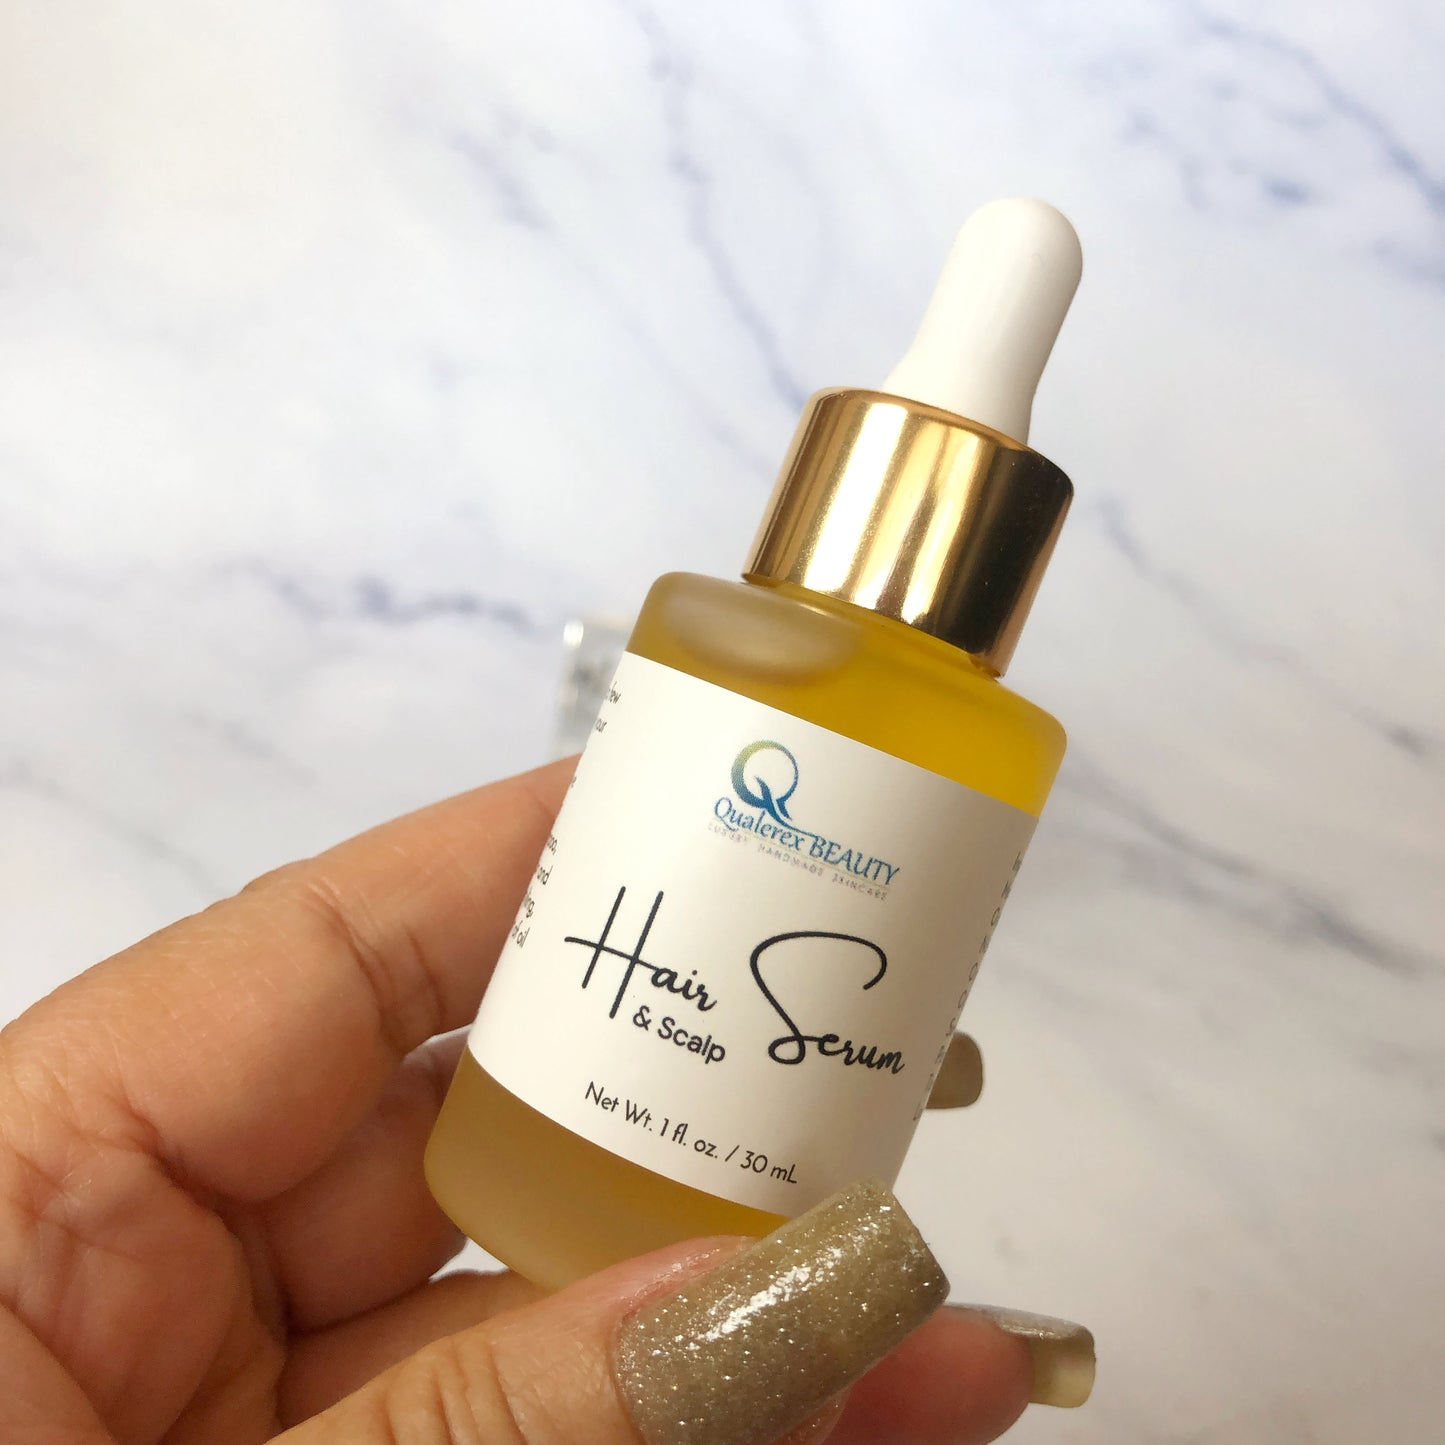 Hair & Scalp Serum Infused with Organic Oils for Strength, Shine, and Blissful Balance